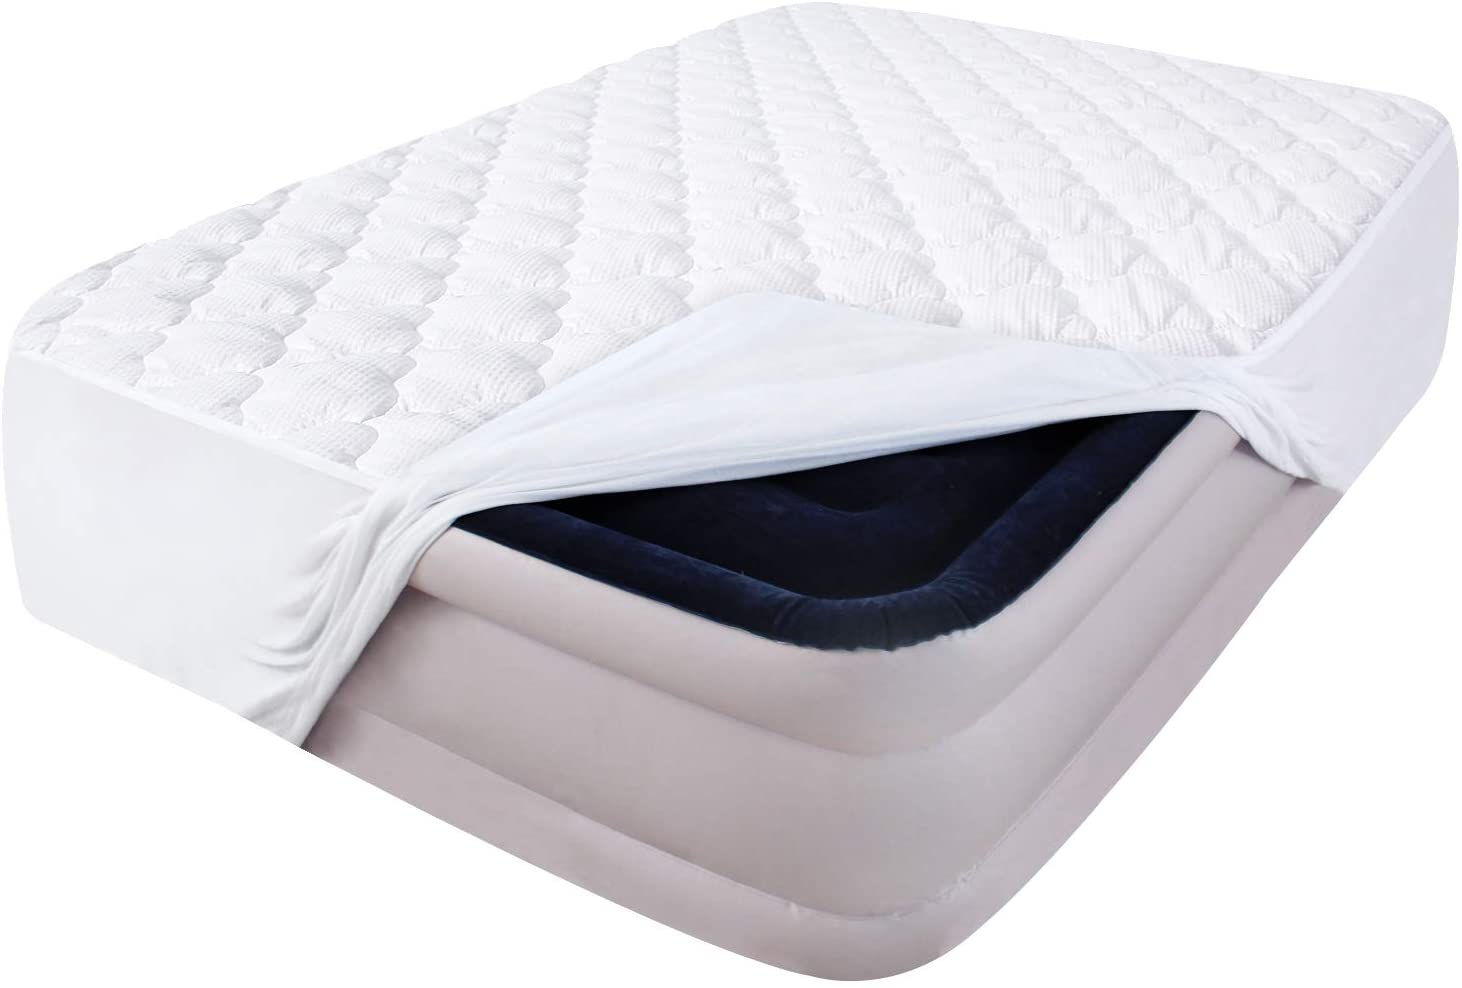 fitted sheet for medical air mattress